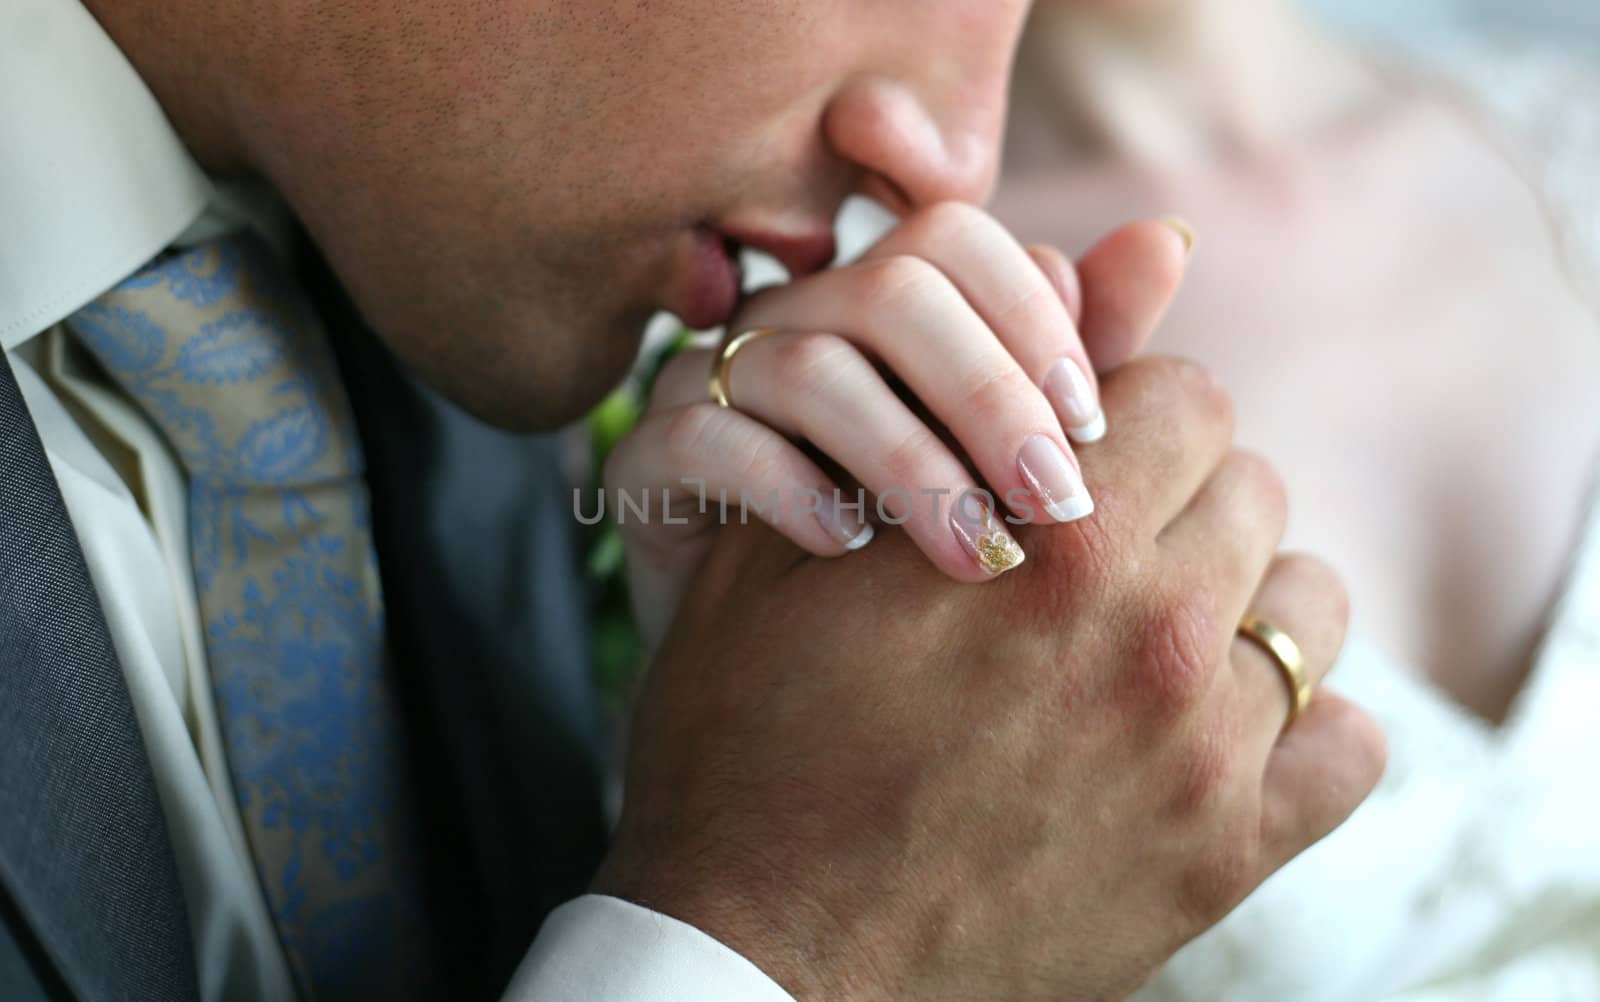 The groom kisses a hand to the bride